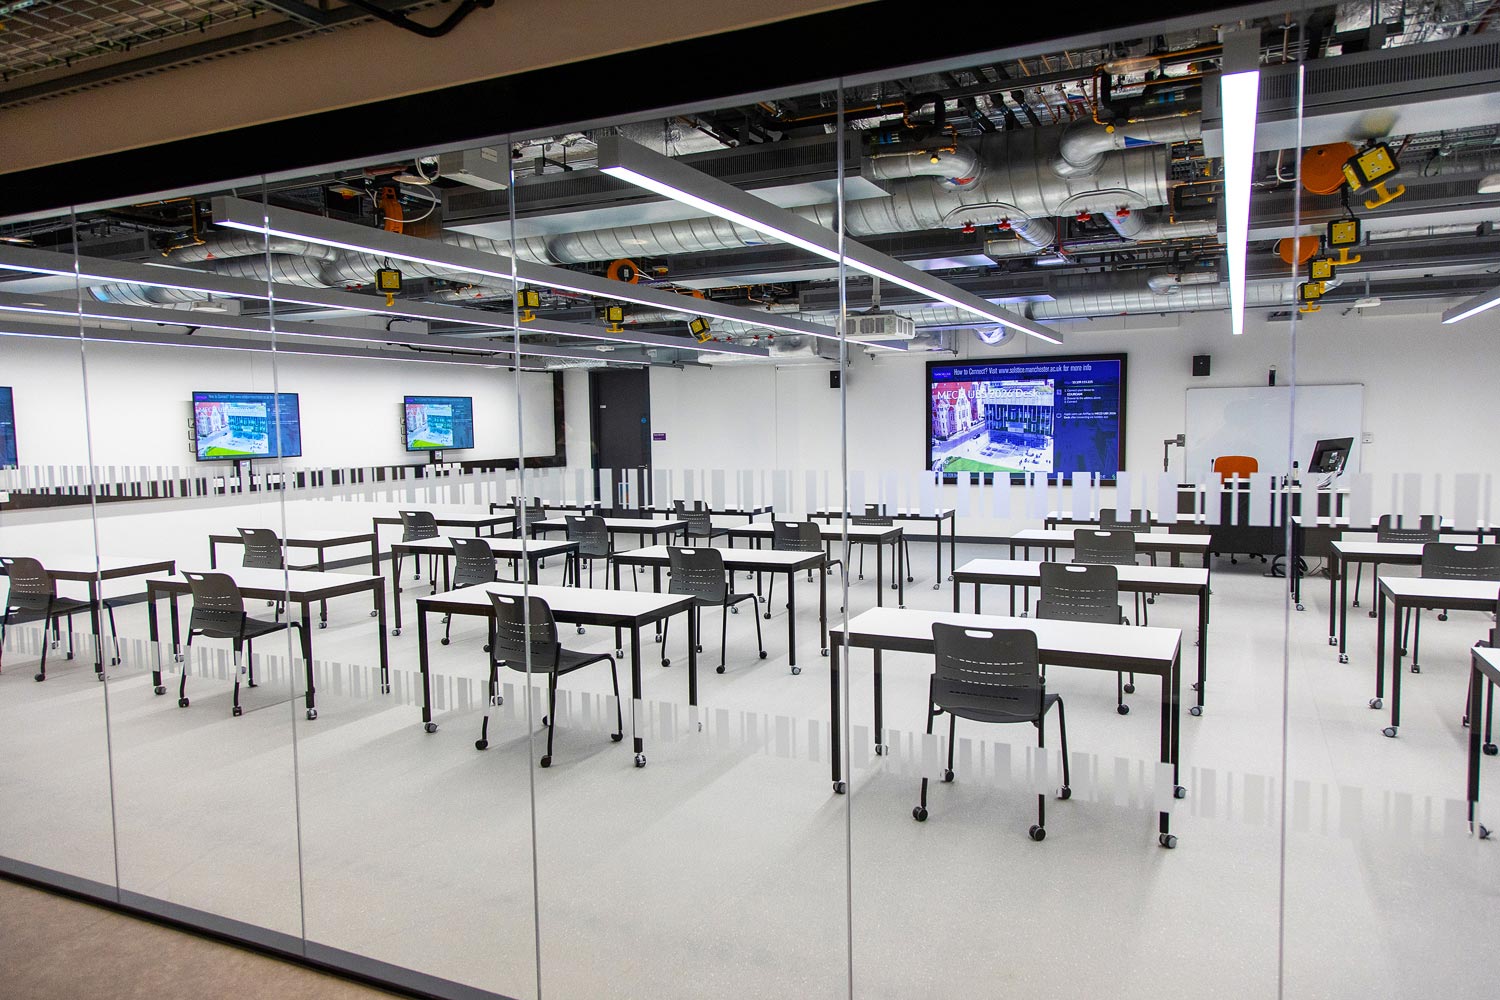 Meet & Teach rooms are designed to be flexible, supporting lecture or collaborative groups. In large and mid-sized rooms, an Extron XTP system or a scaling presentation switcher provides AV signal routing from connected and wireless sources to the multiple displays.